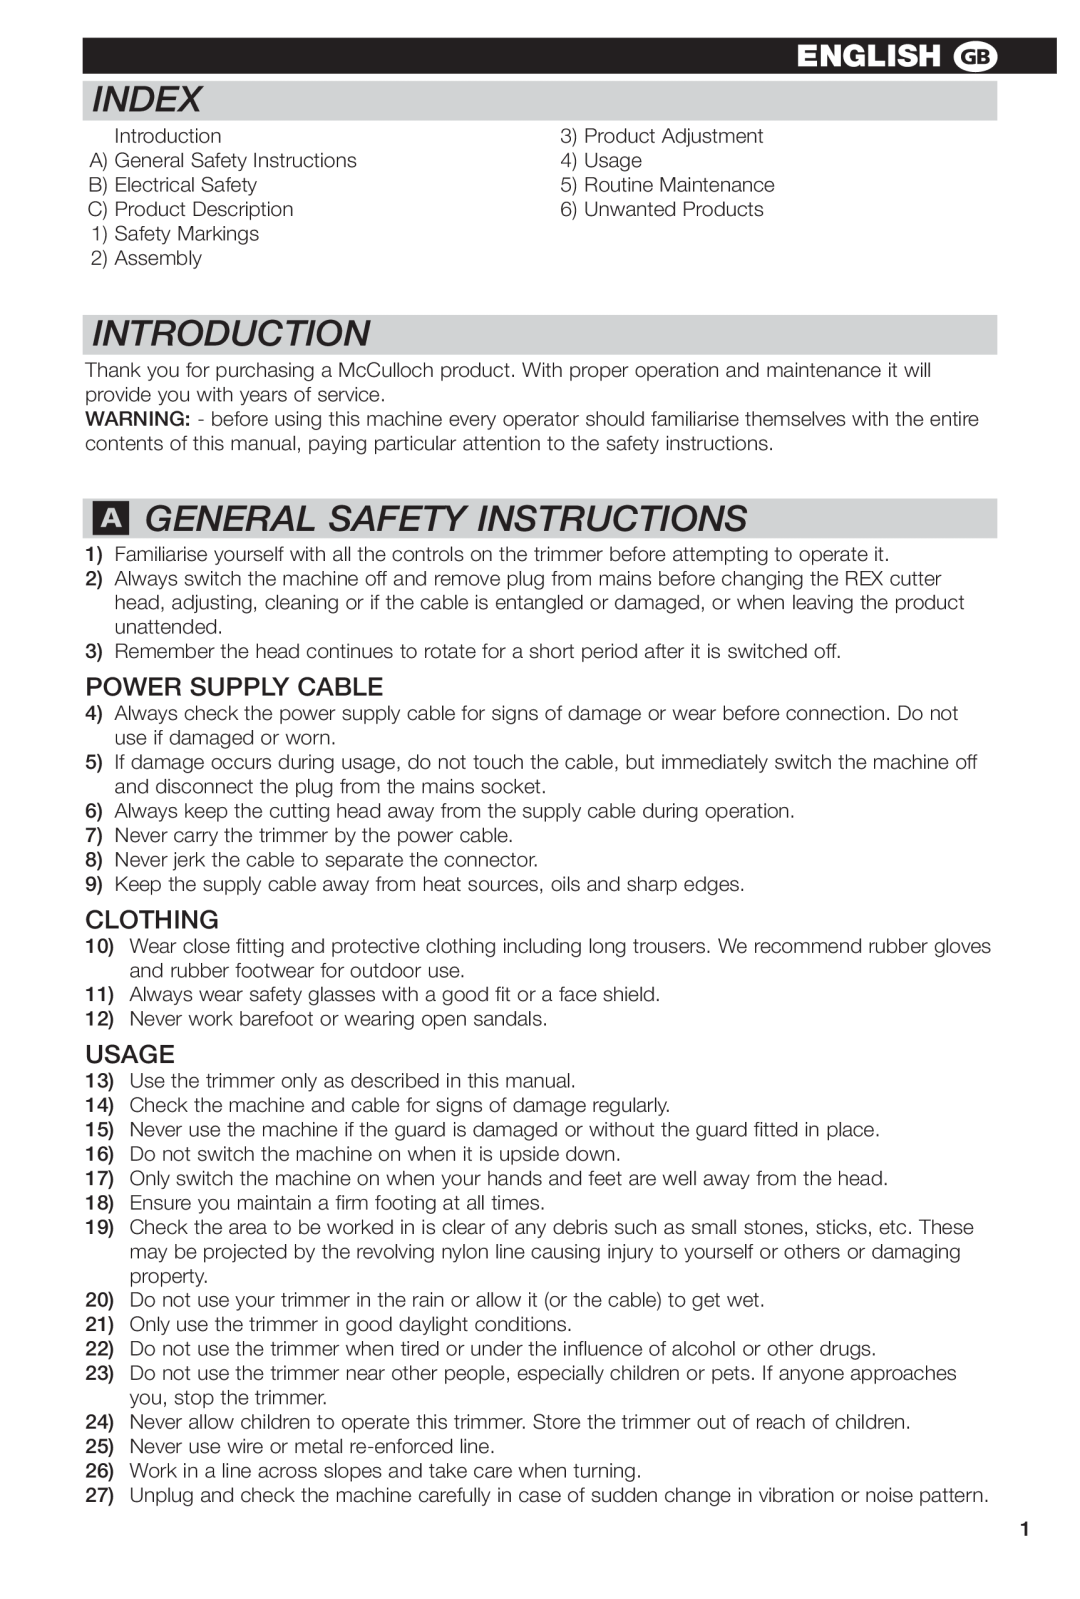 McCulloch REX 700, REX 500, REX 450 manual Index, Introduction, Qgeneral Safety Instructions, ENGLISH g 